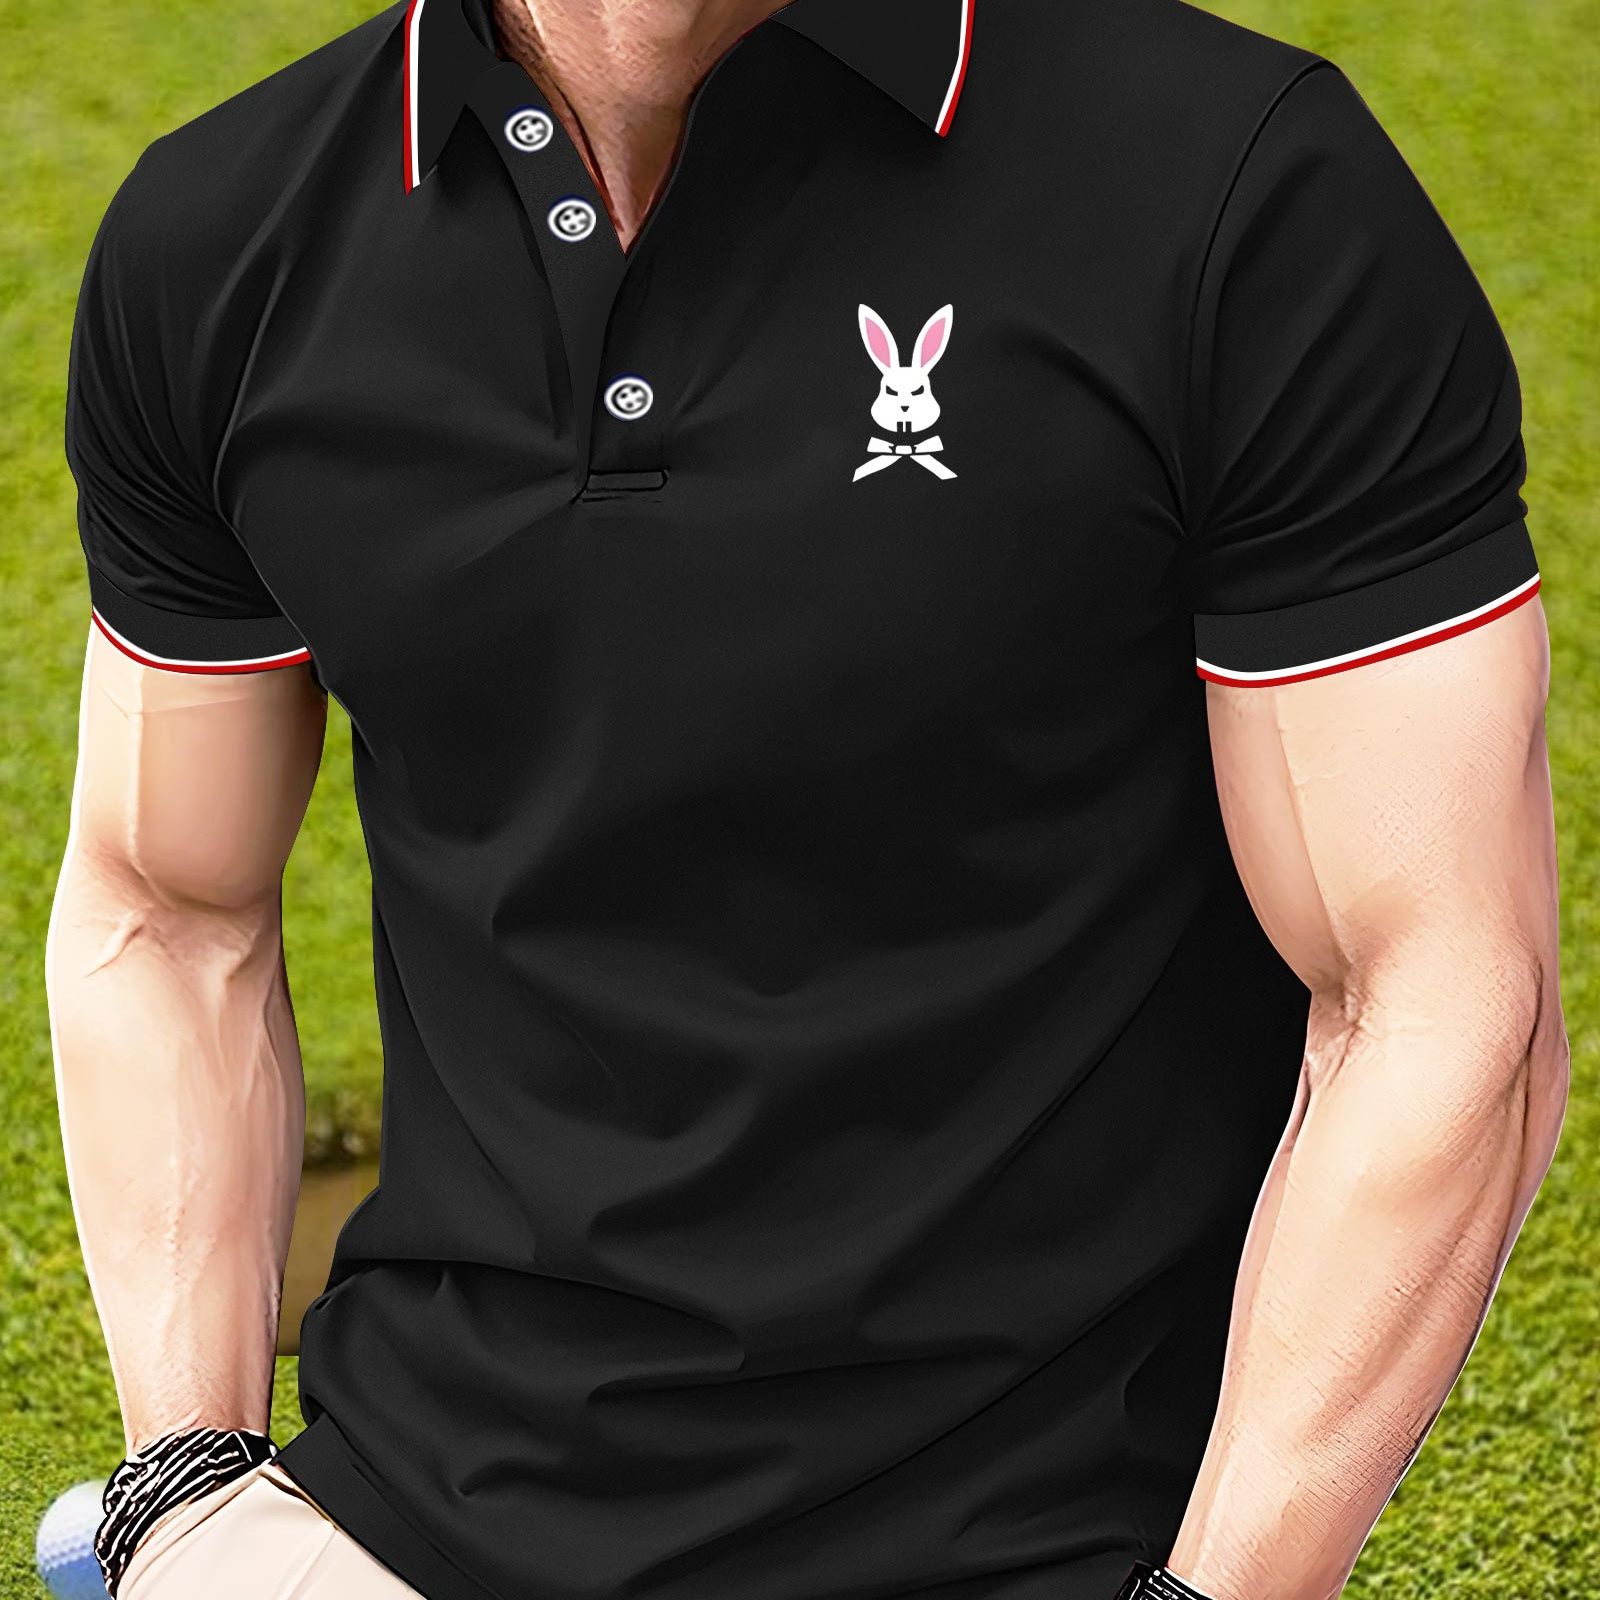 

Funny Rabbit Print Men's Trendy New Henley T-shirt, Fashion Short Sleeve Casual Golf Tee, Comfy Breathable Lapel Business Top For Spring Summer Tennis Outdoor Activities Holiday As Gifts